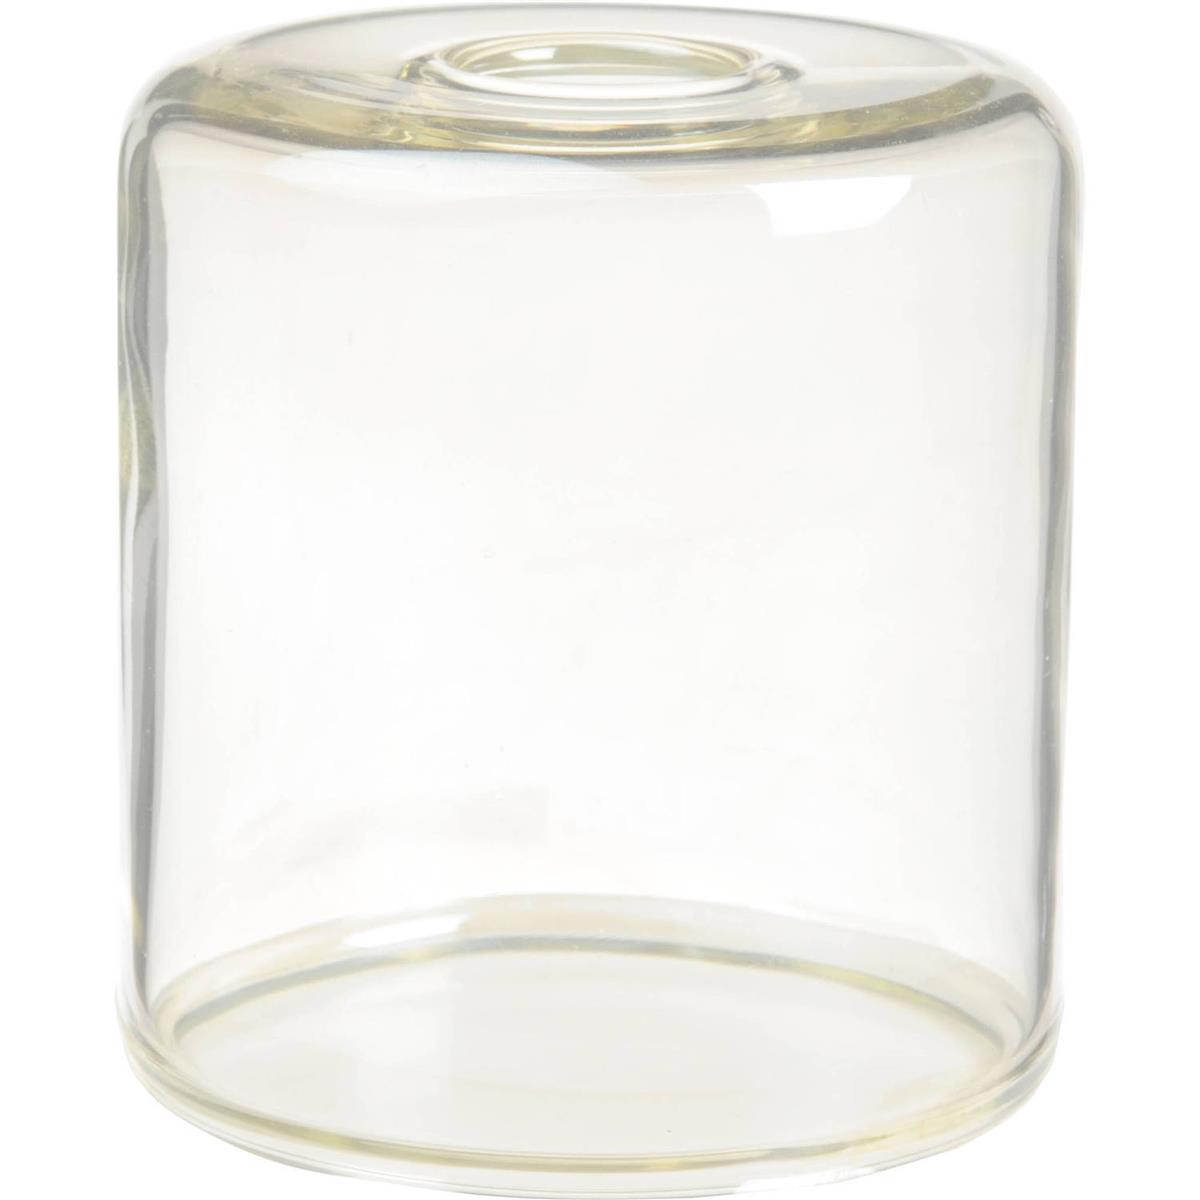 Photos - Studio Lighting HENSEL Coated Clear Glass Dome for Integra Series Monolights 9454637 